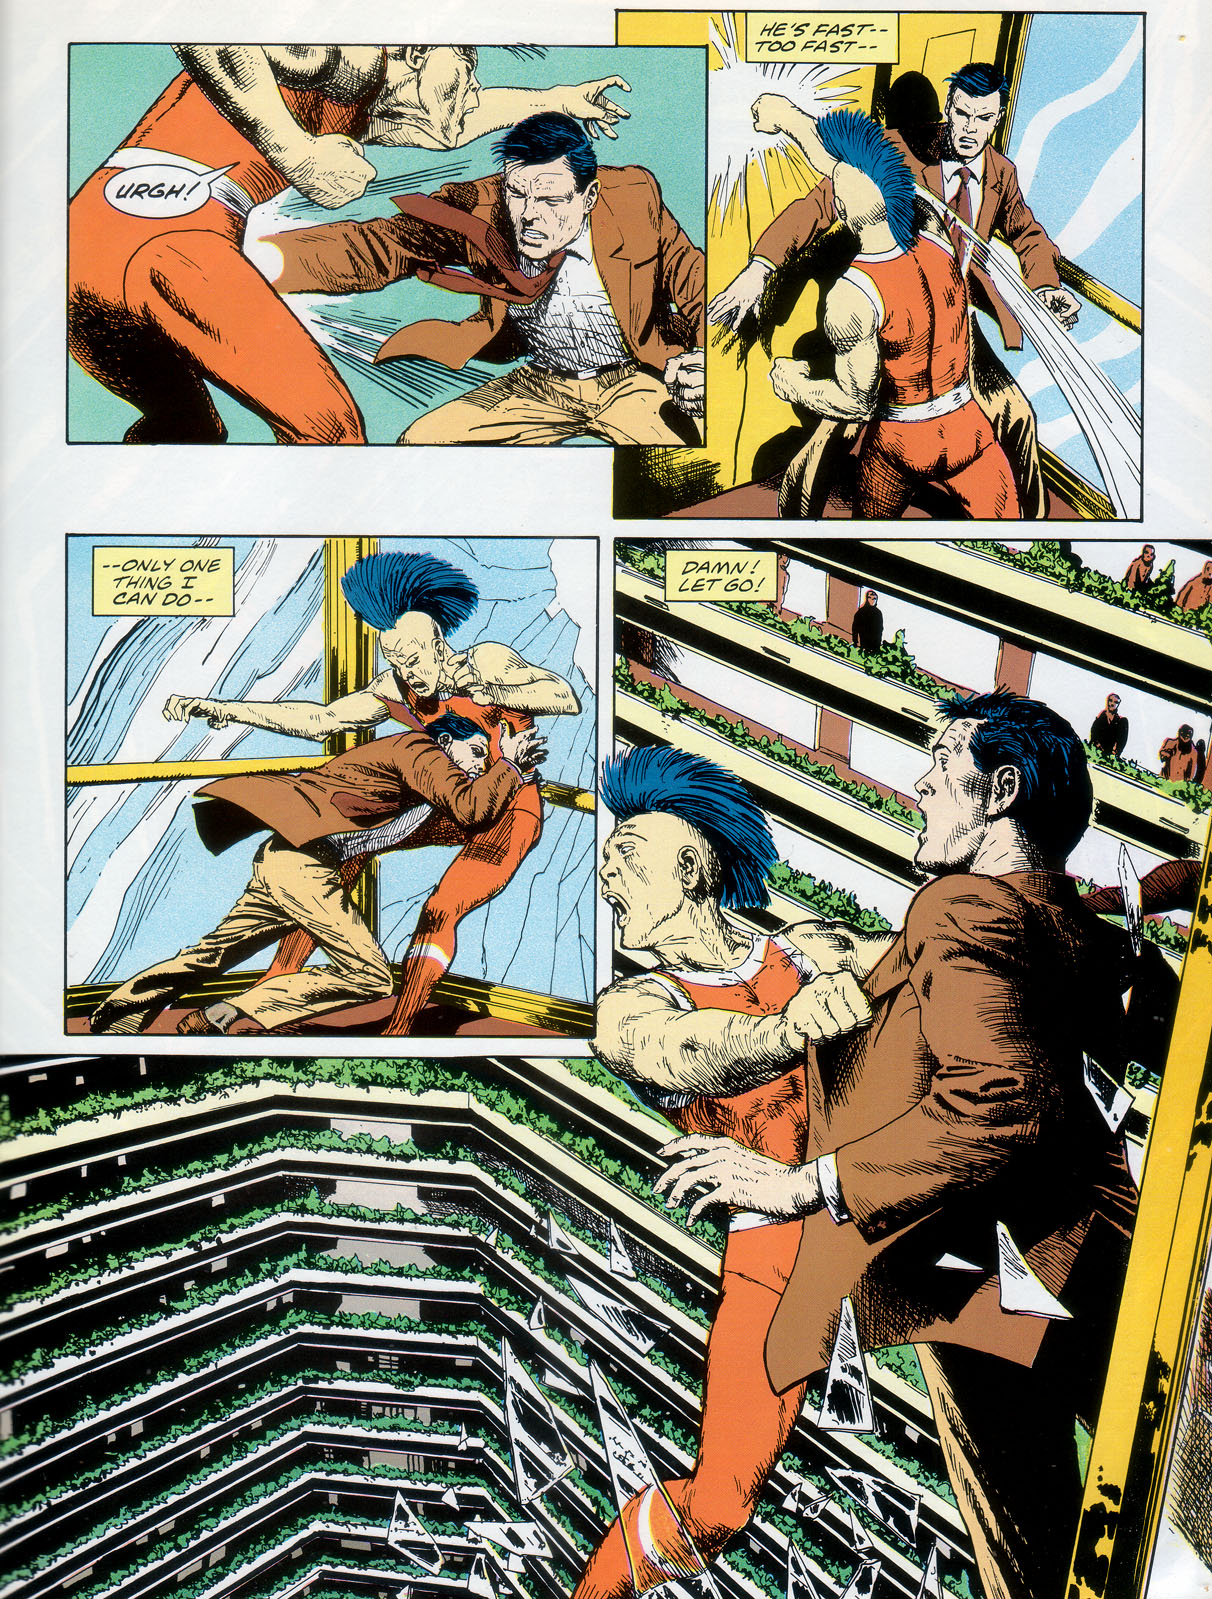 Marvel Graphic Novel issue 57 - Rick Mason - The Agent - Page 15